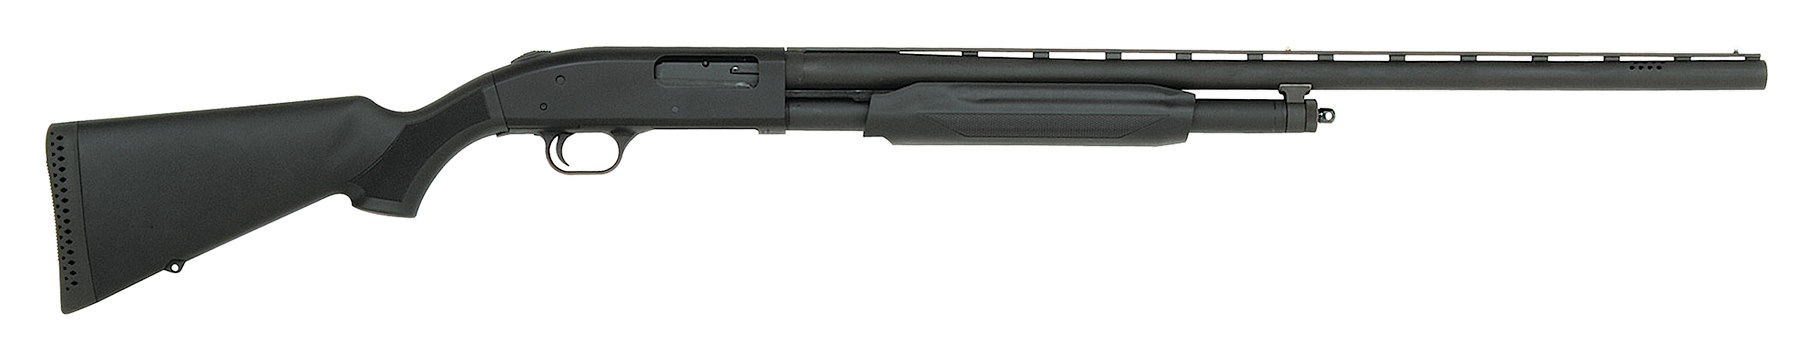 Image of Mossberg 500 Pump 12 ga 28" 3" Black Synthetic Stock Blued